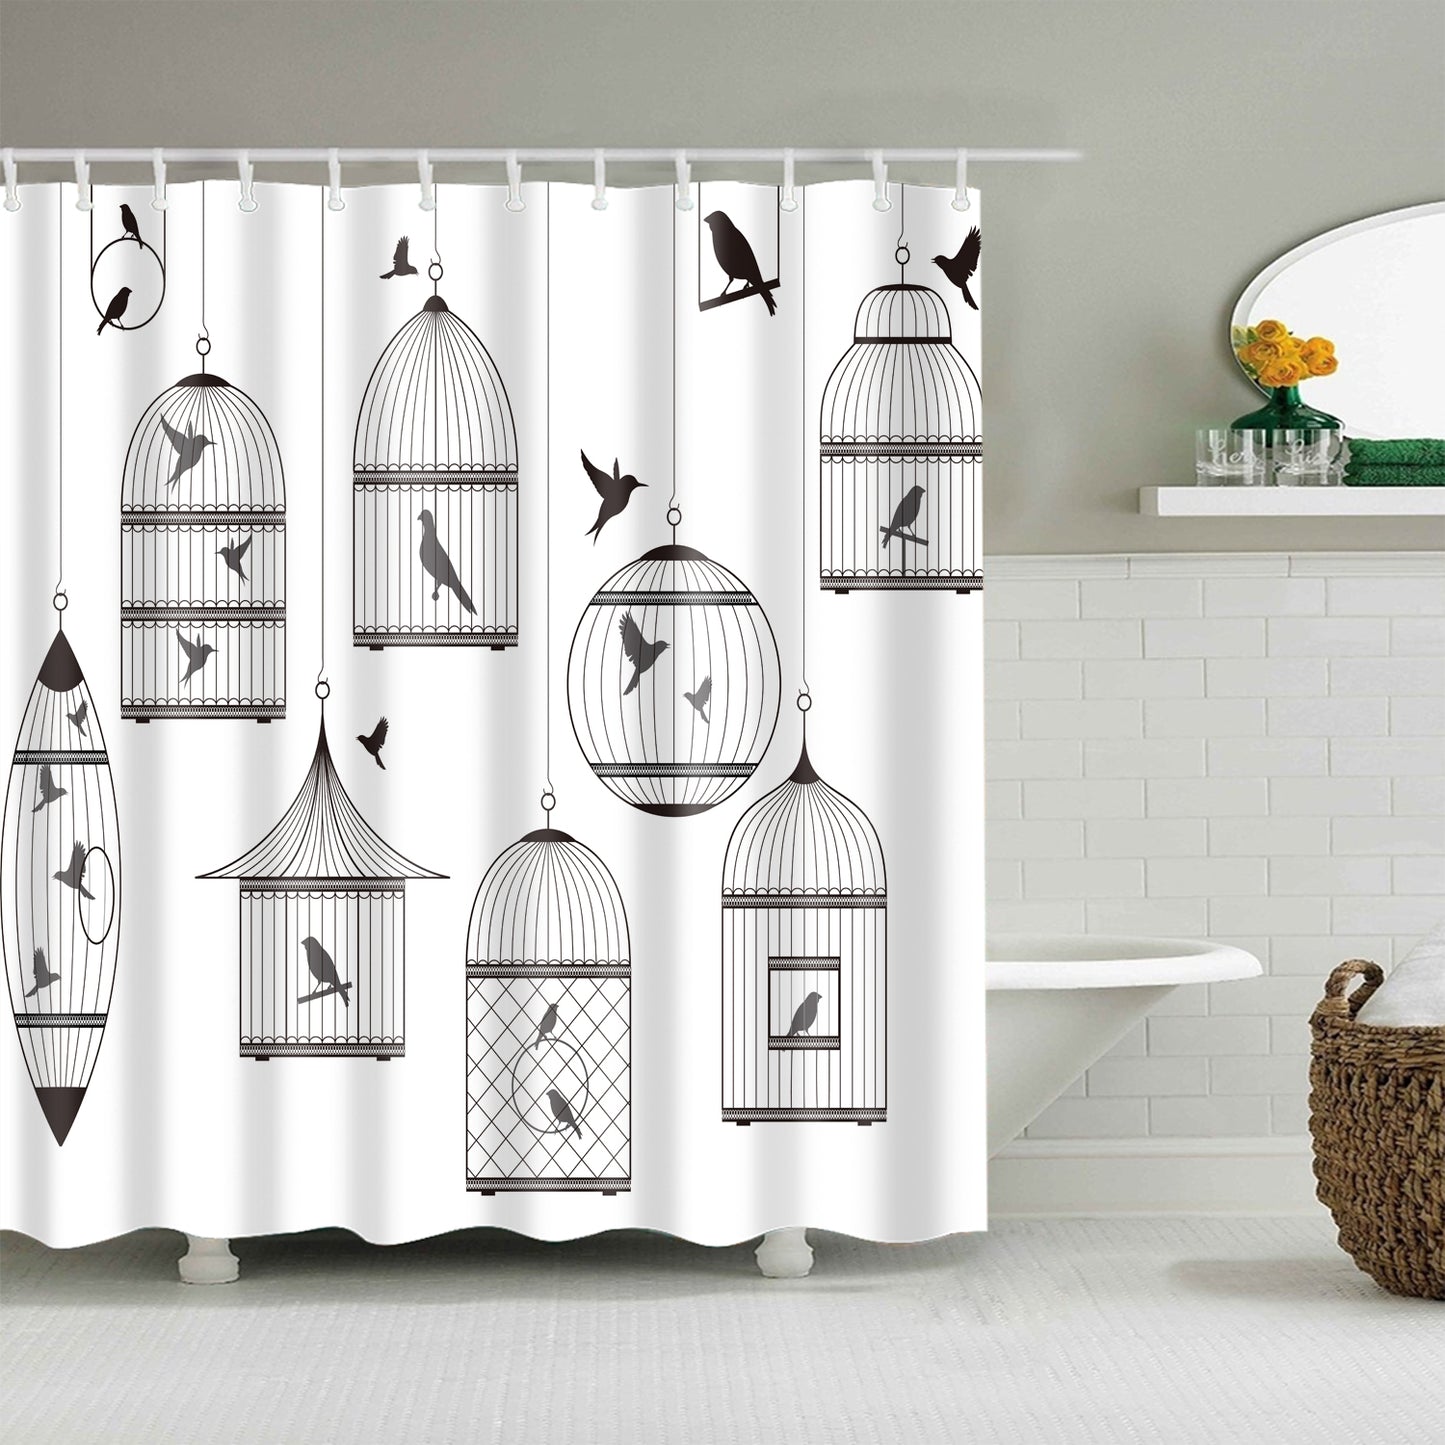 White Backdrop Various Kinds of Birds Birdcages Shower Curtain